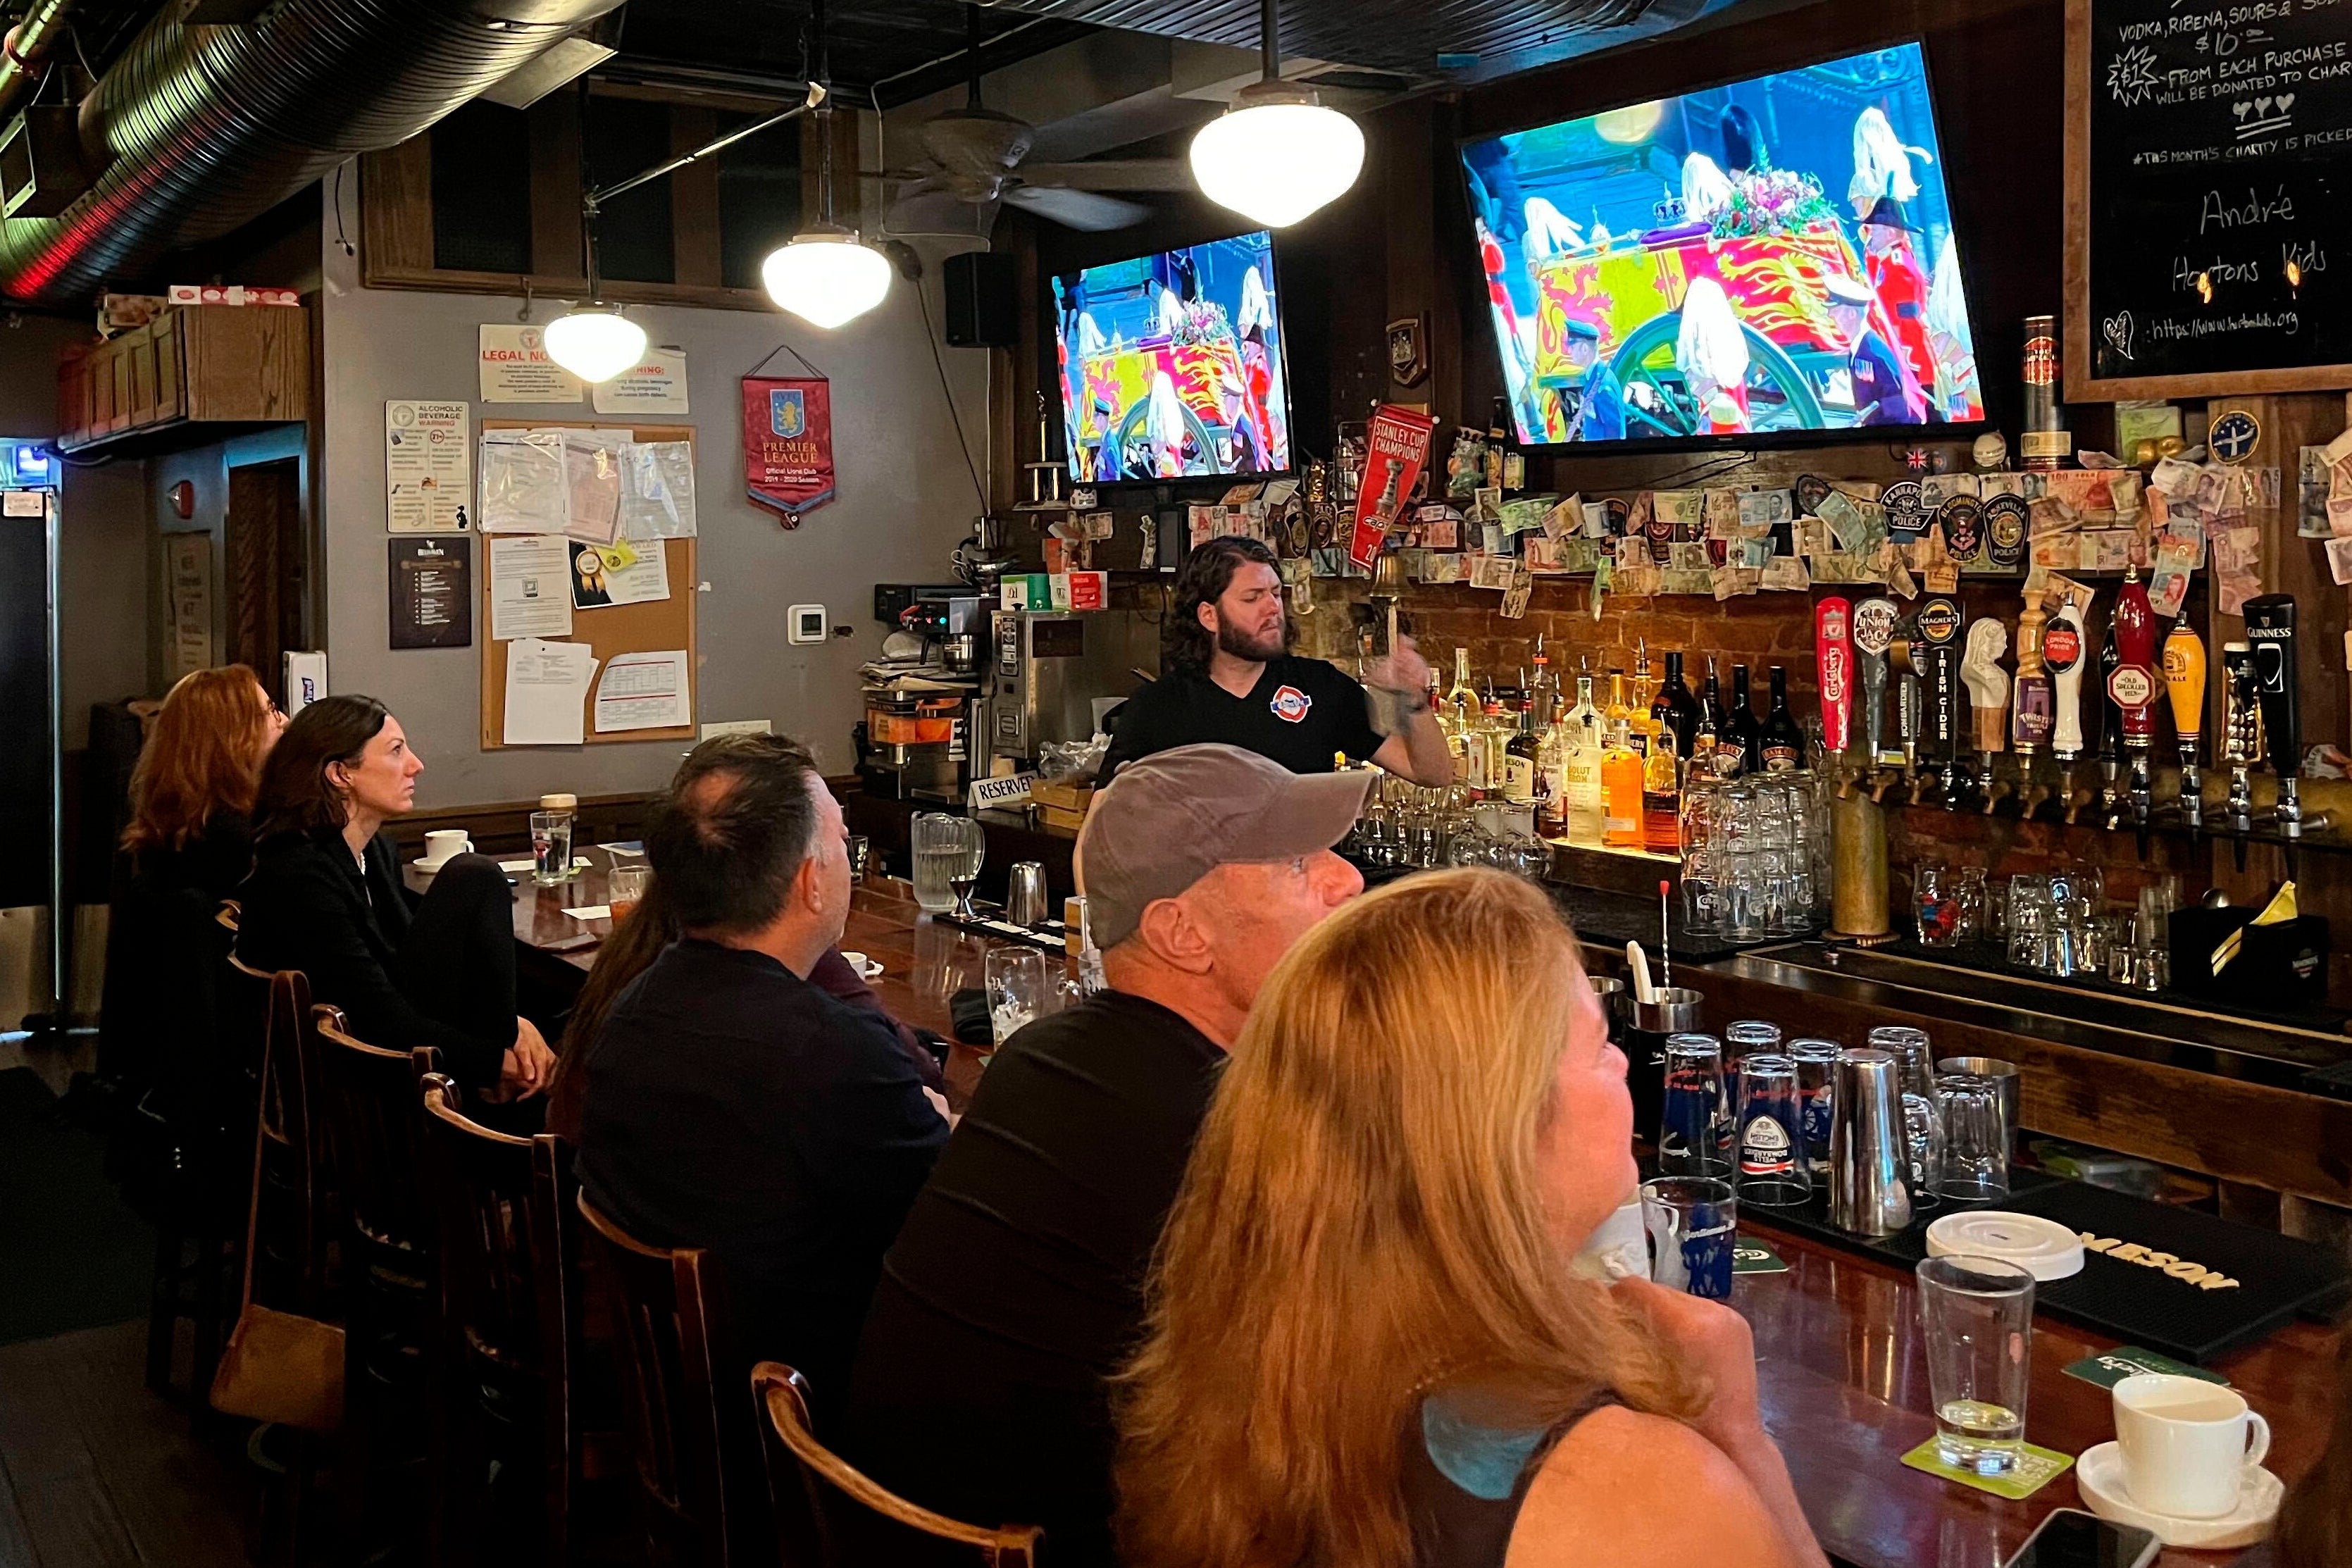 Visitors watch coverage of the funeral procession at The Queen Vic, a British pub in Washington